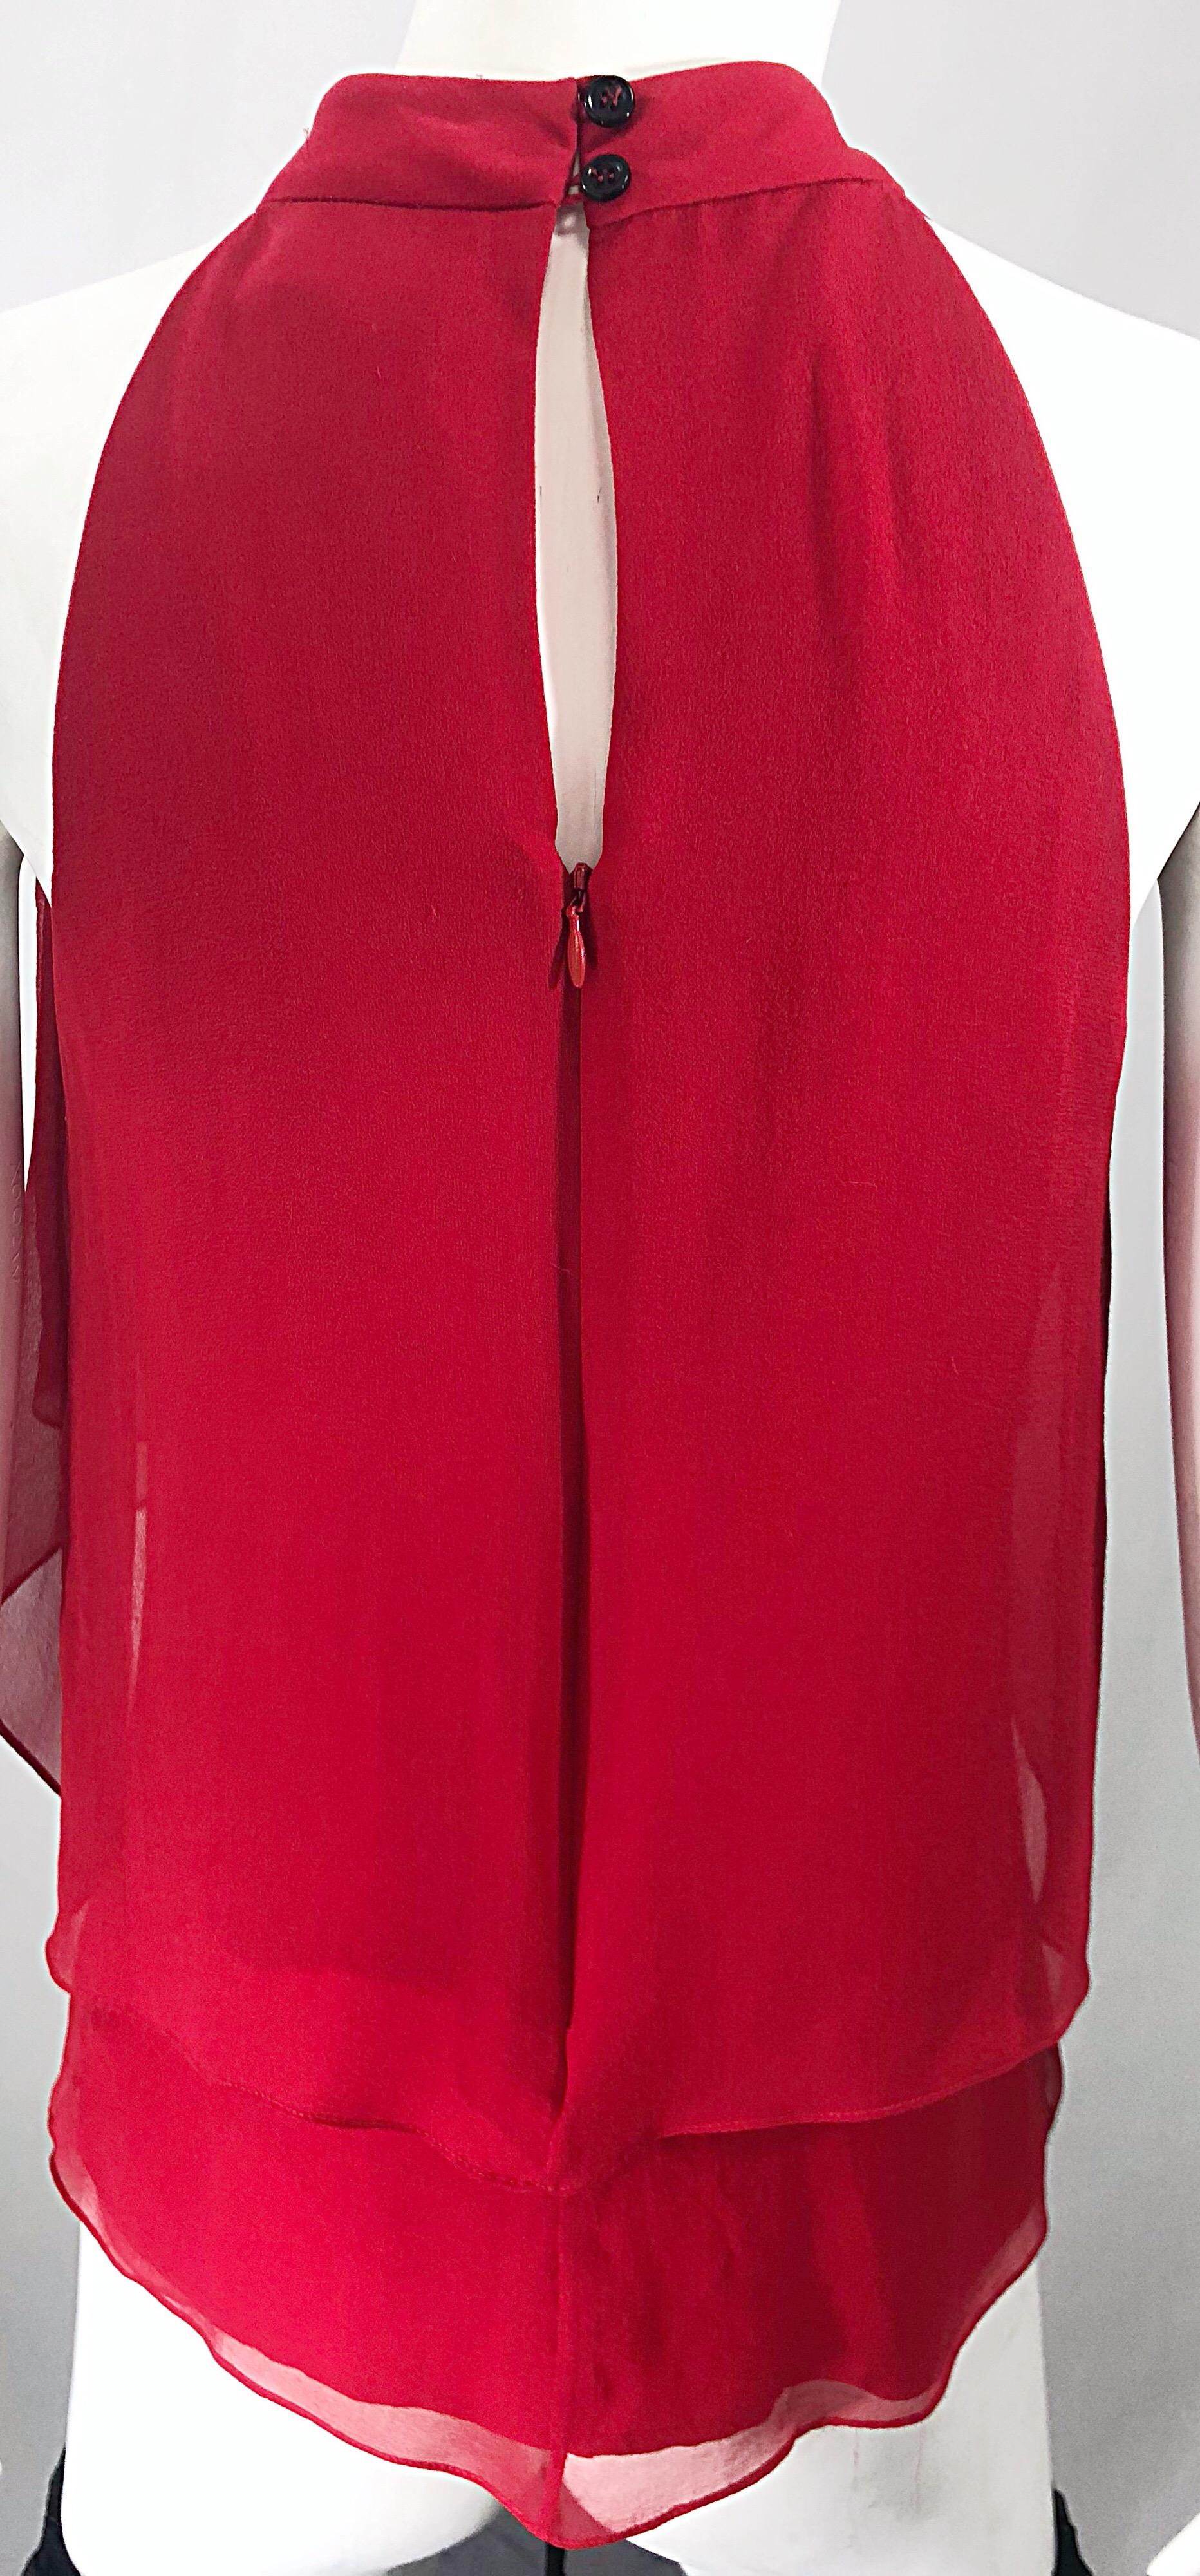 Christopher Dean Early 2000s Lipstick Red Size 4 Silk Chiffon Blouse Top For Sale 2